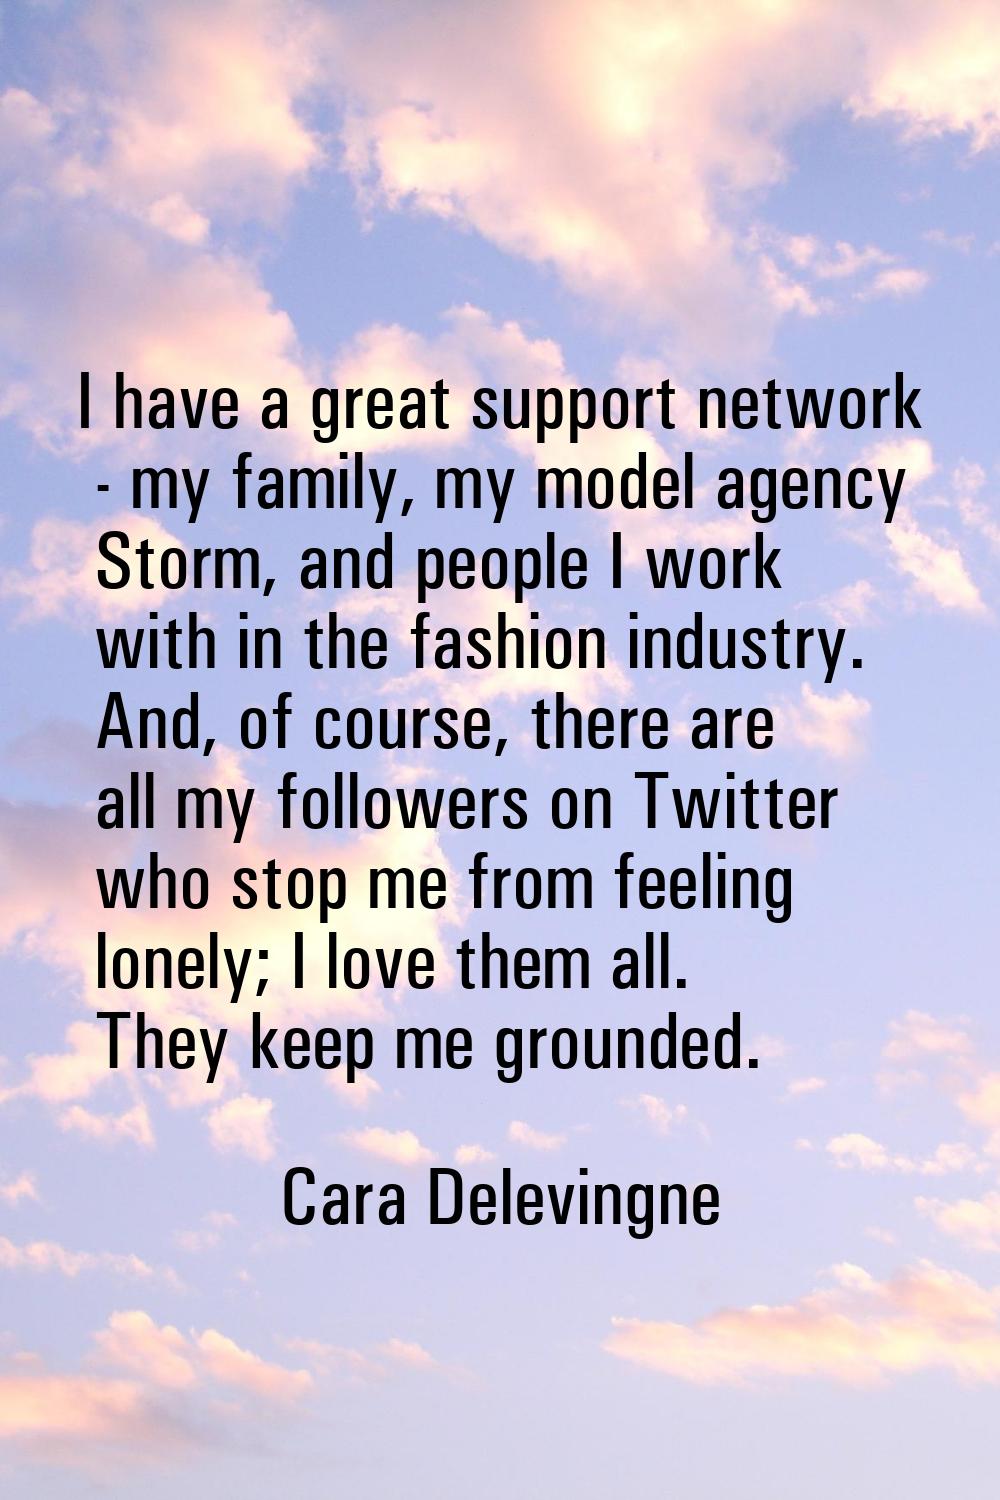 I have a great support network - my family, my model agency Storm, and people I work with in the fa